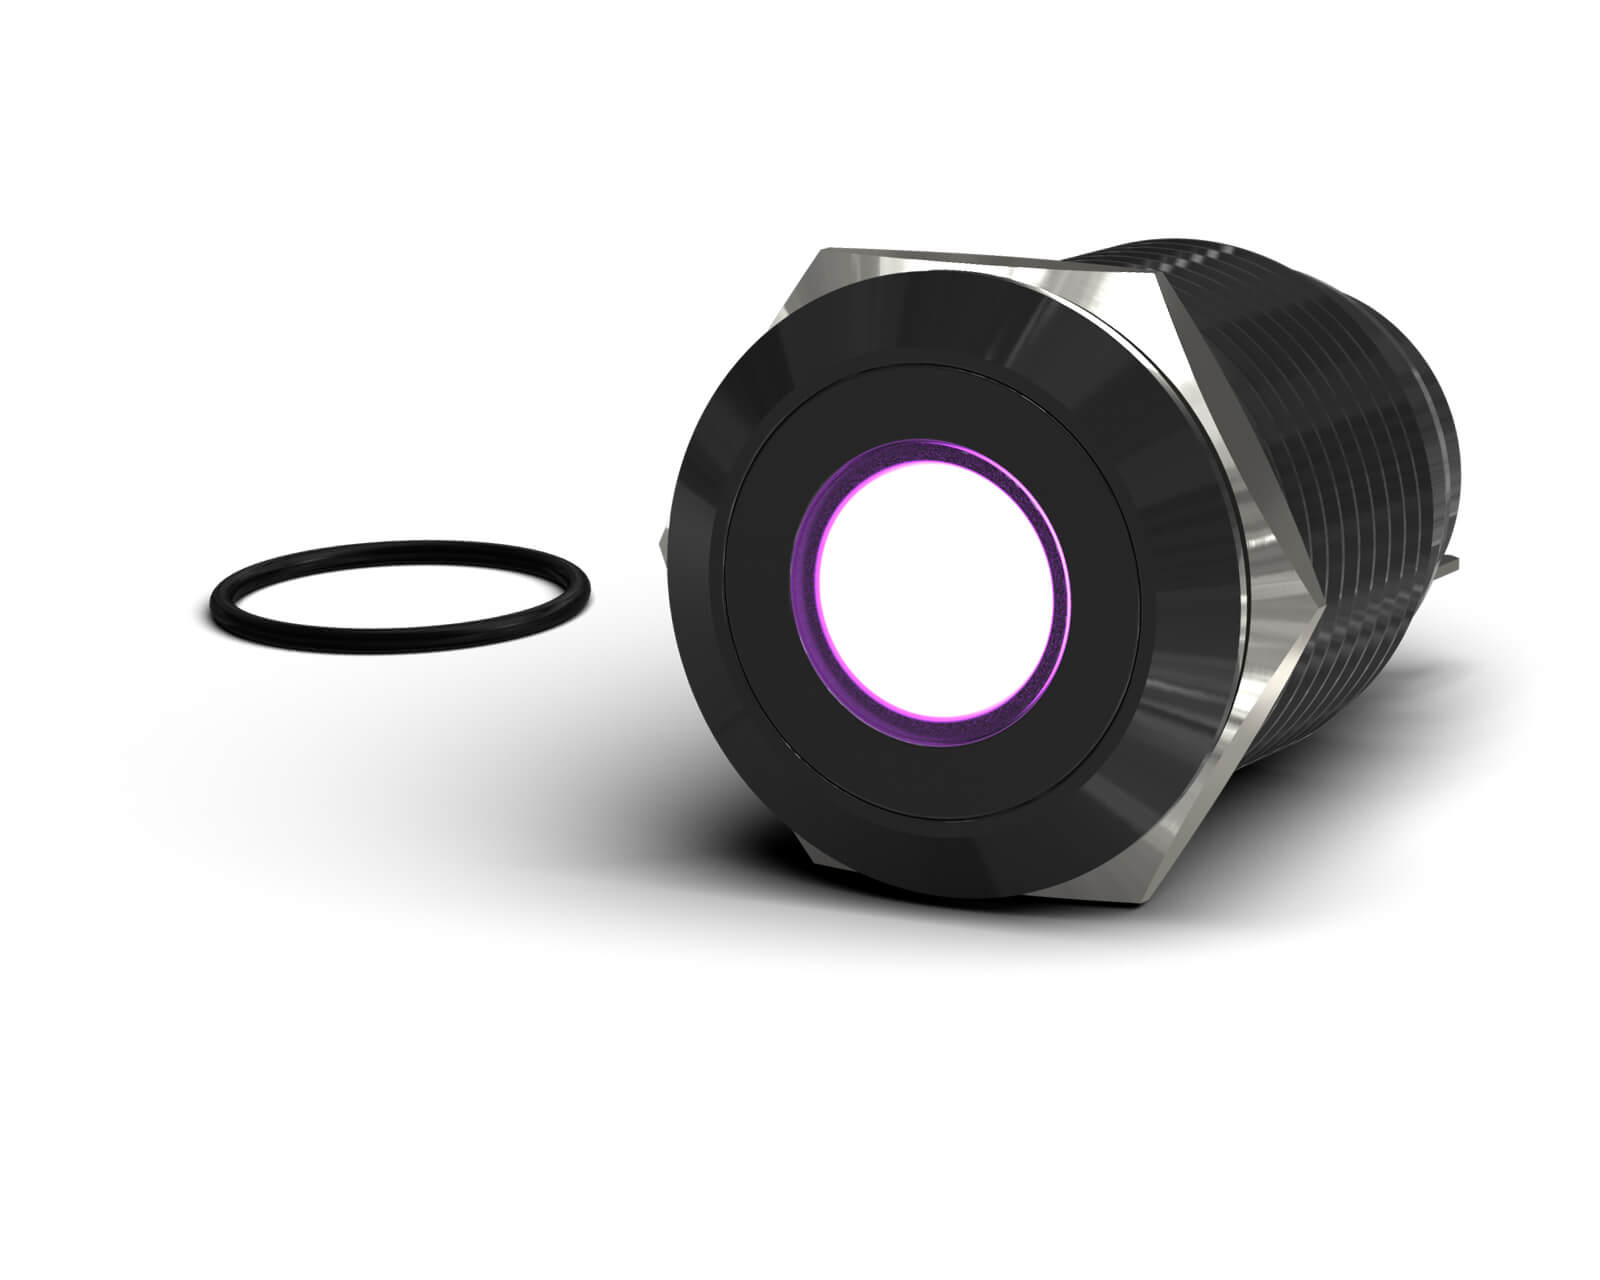 PrimoChill Black Aluminum Momentary Vandal Resistant Switch - 22mm - PrimoChill - KEEPING IT COOL Purple LED Dot